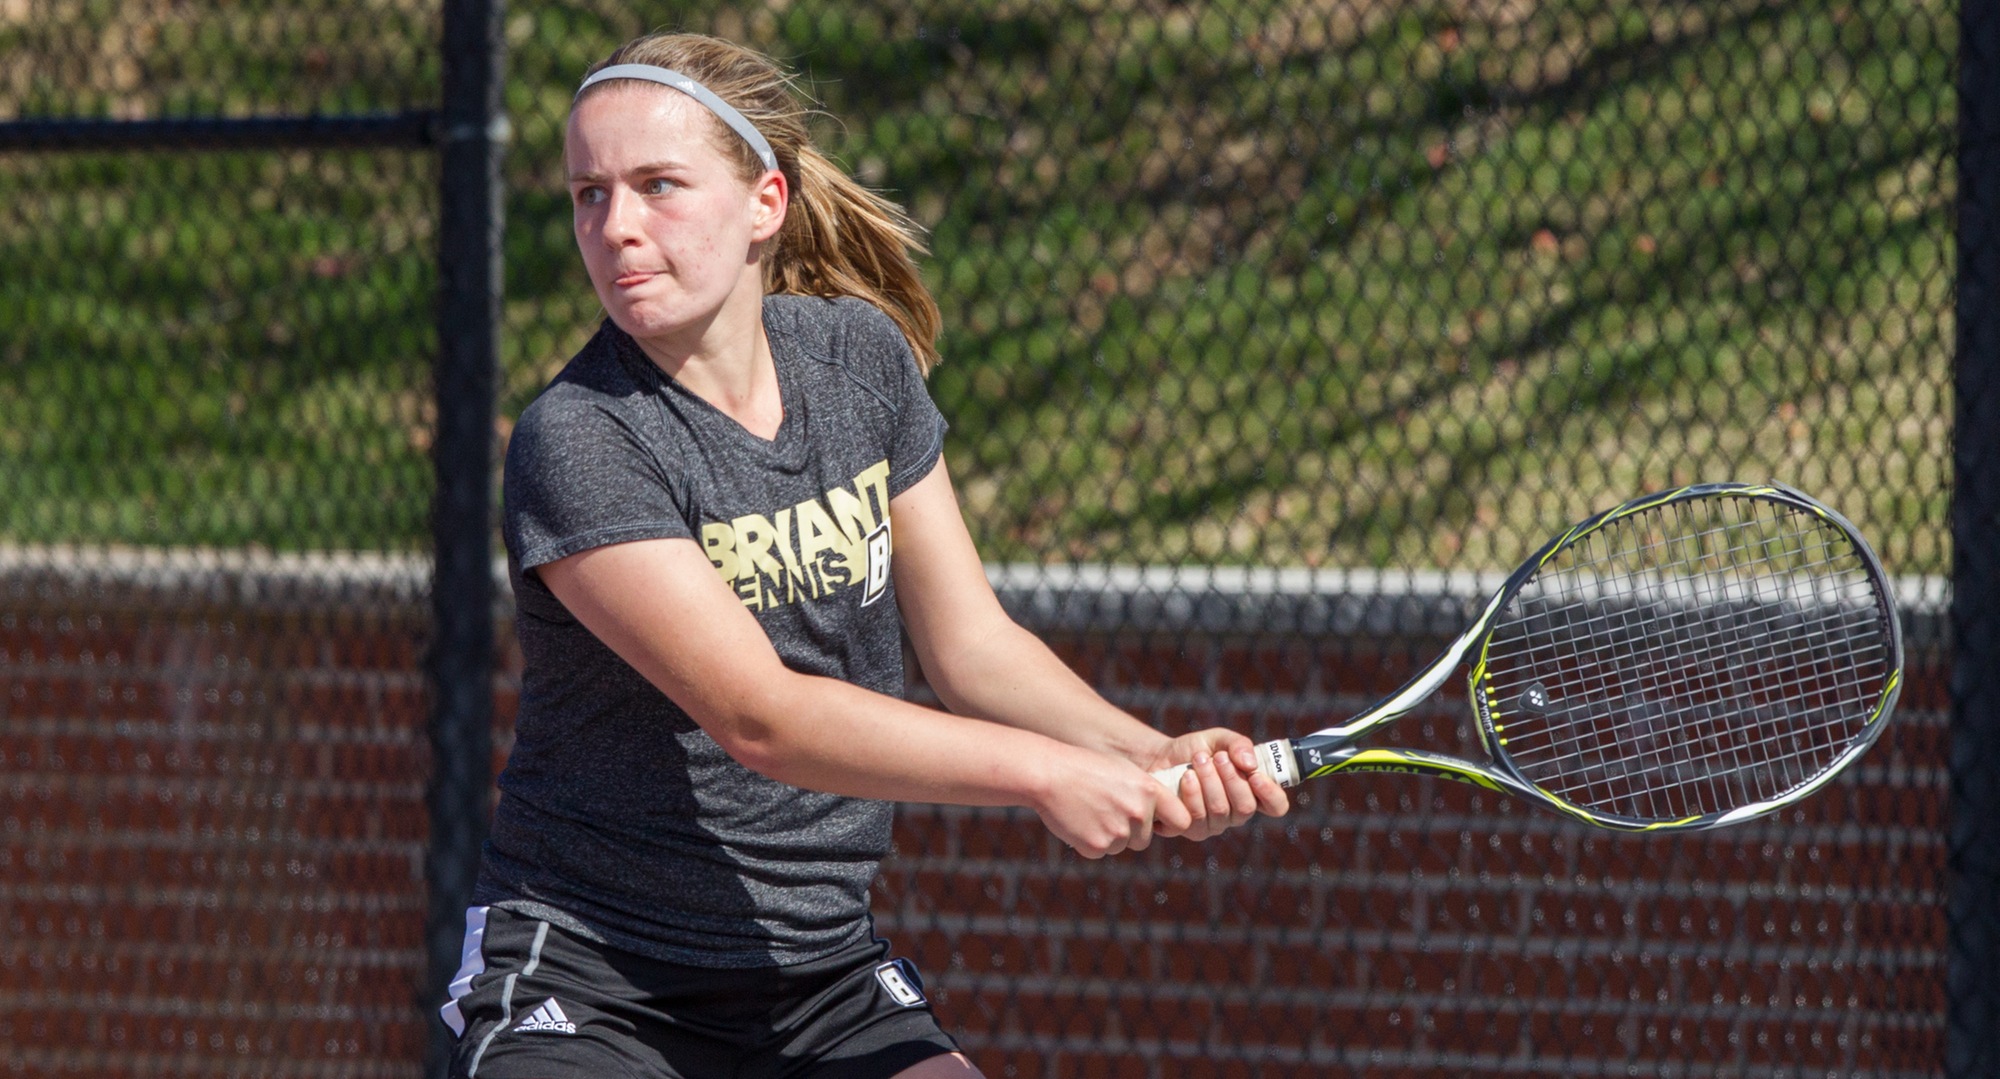 Bulldogs fall, 4-3, to Knights in NEC Semifinals